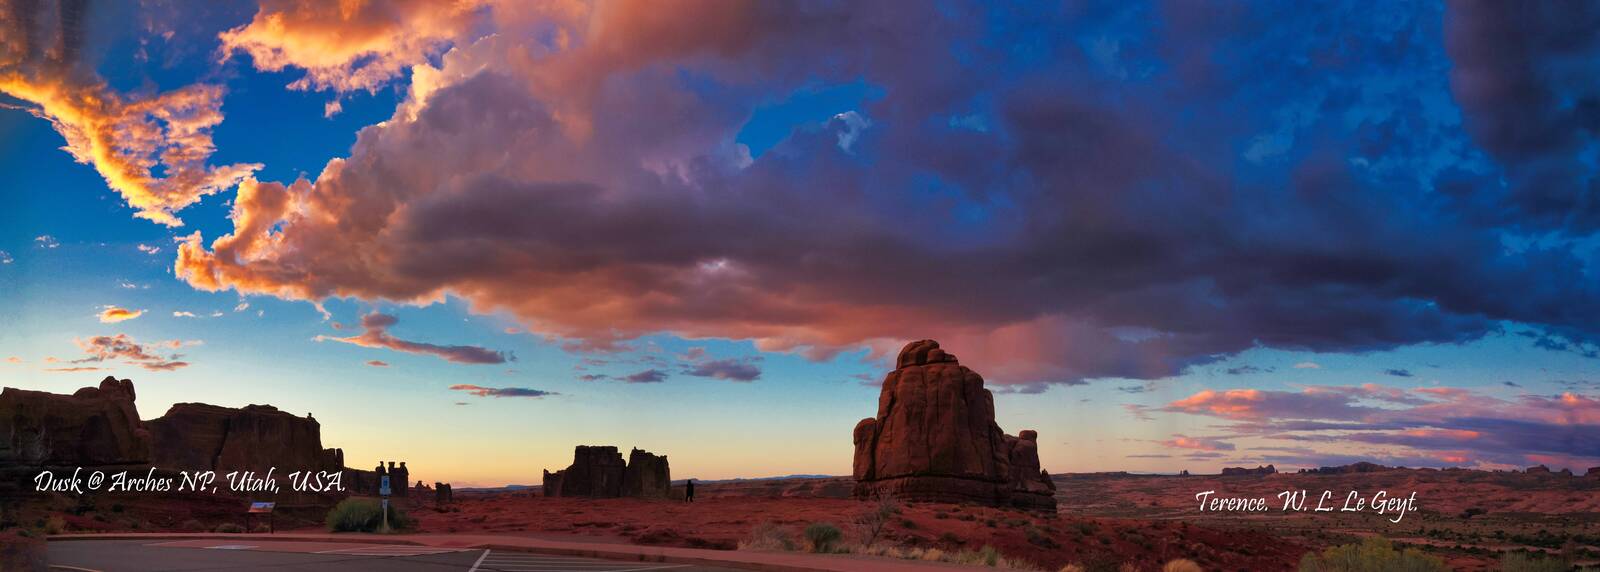 Image of La Sal Mountains Viewpoint, Arches NP by Terry Leg